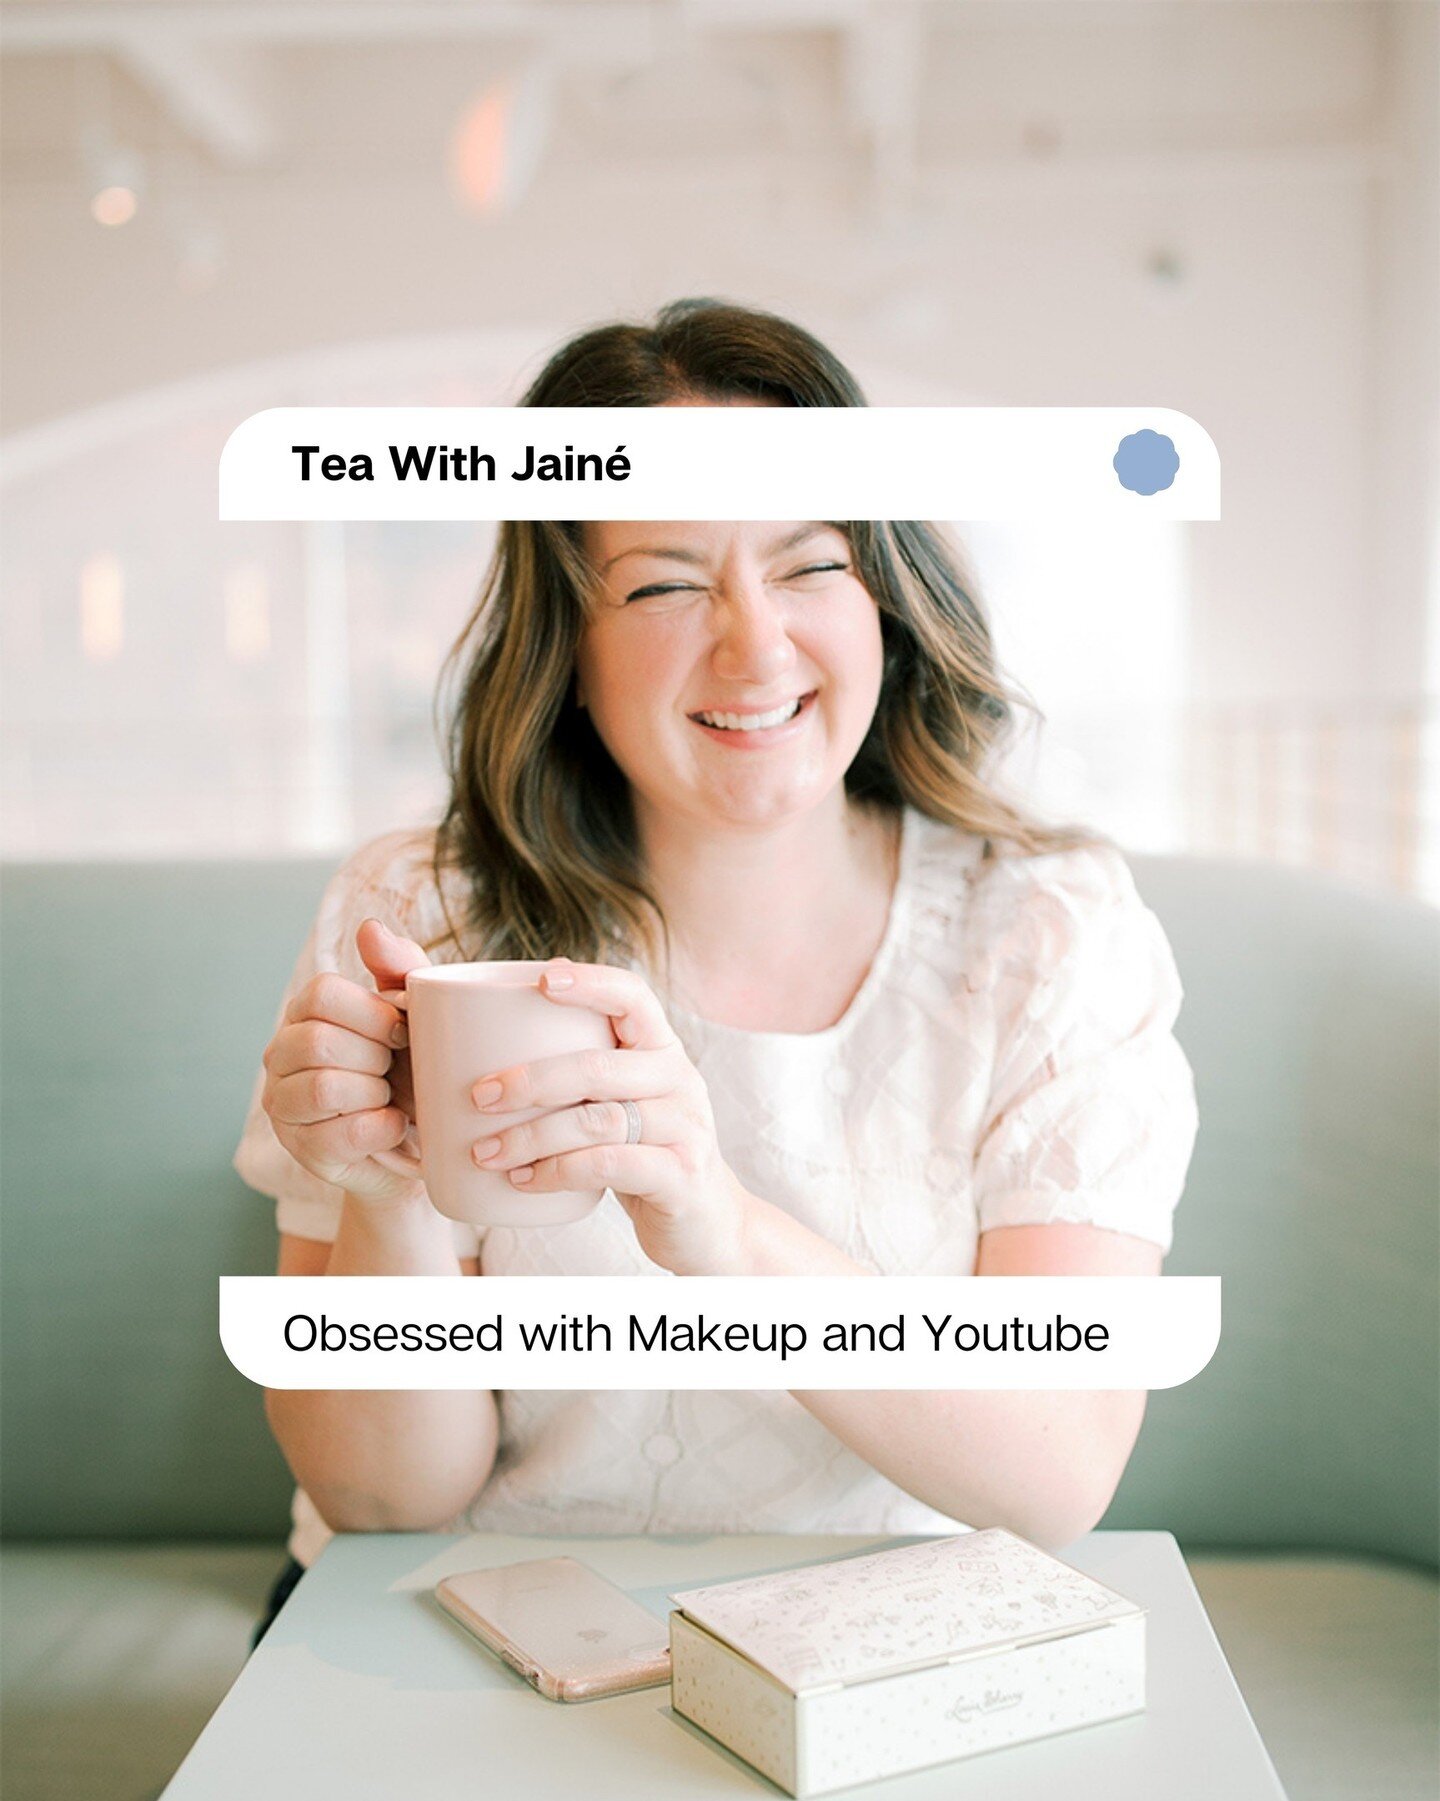 We have some new faces here, so I thought I&rsquo;d introduce myself... kinda different this time around!⁠
⁠
Hi, I&rsquo;m Jain&eacute; and I&rsquo;m a Wedding Photographer, Podcaster, and Submissions Expert.⁠
⁠
You already know that I know a thing o